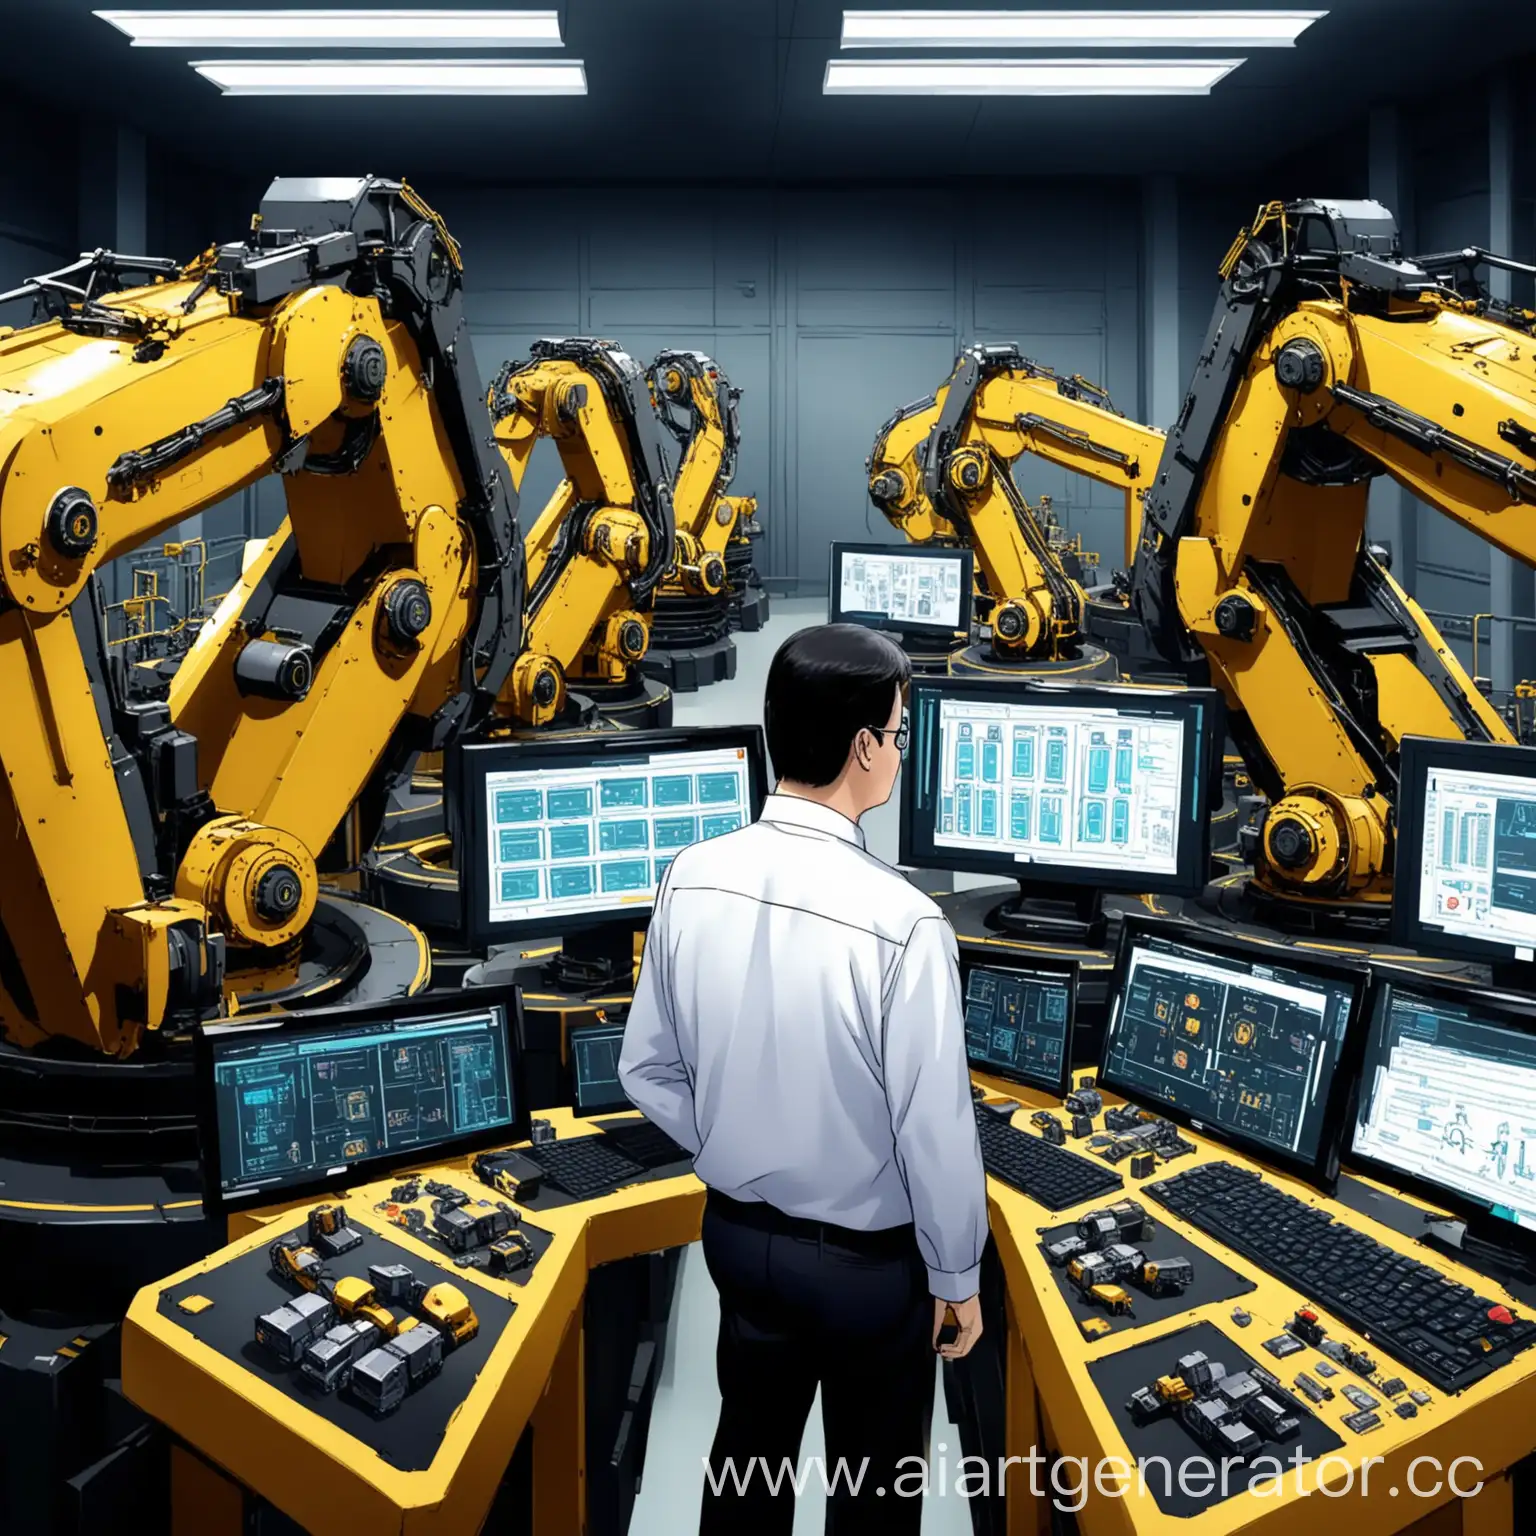 Department-of-Automation-Chief-Scientist-Overseeing-Mining-Machines